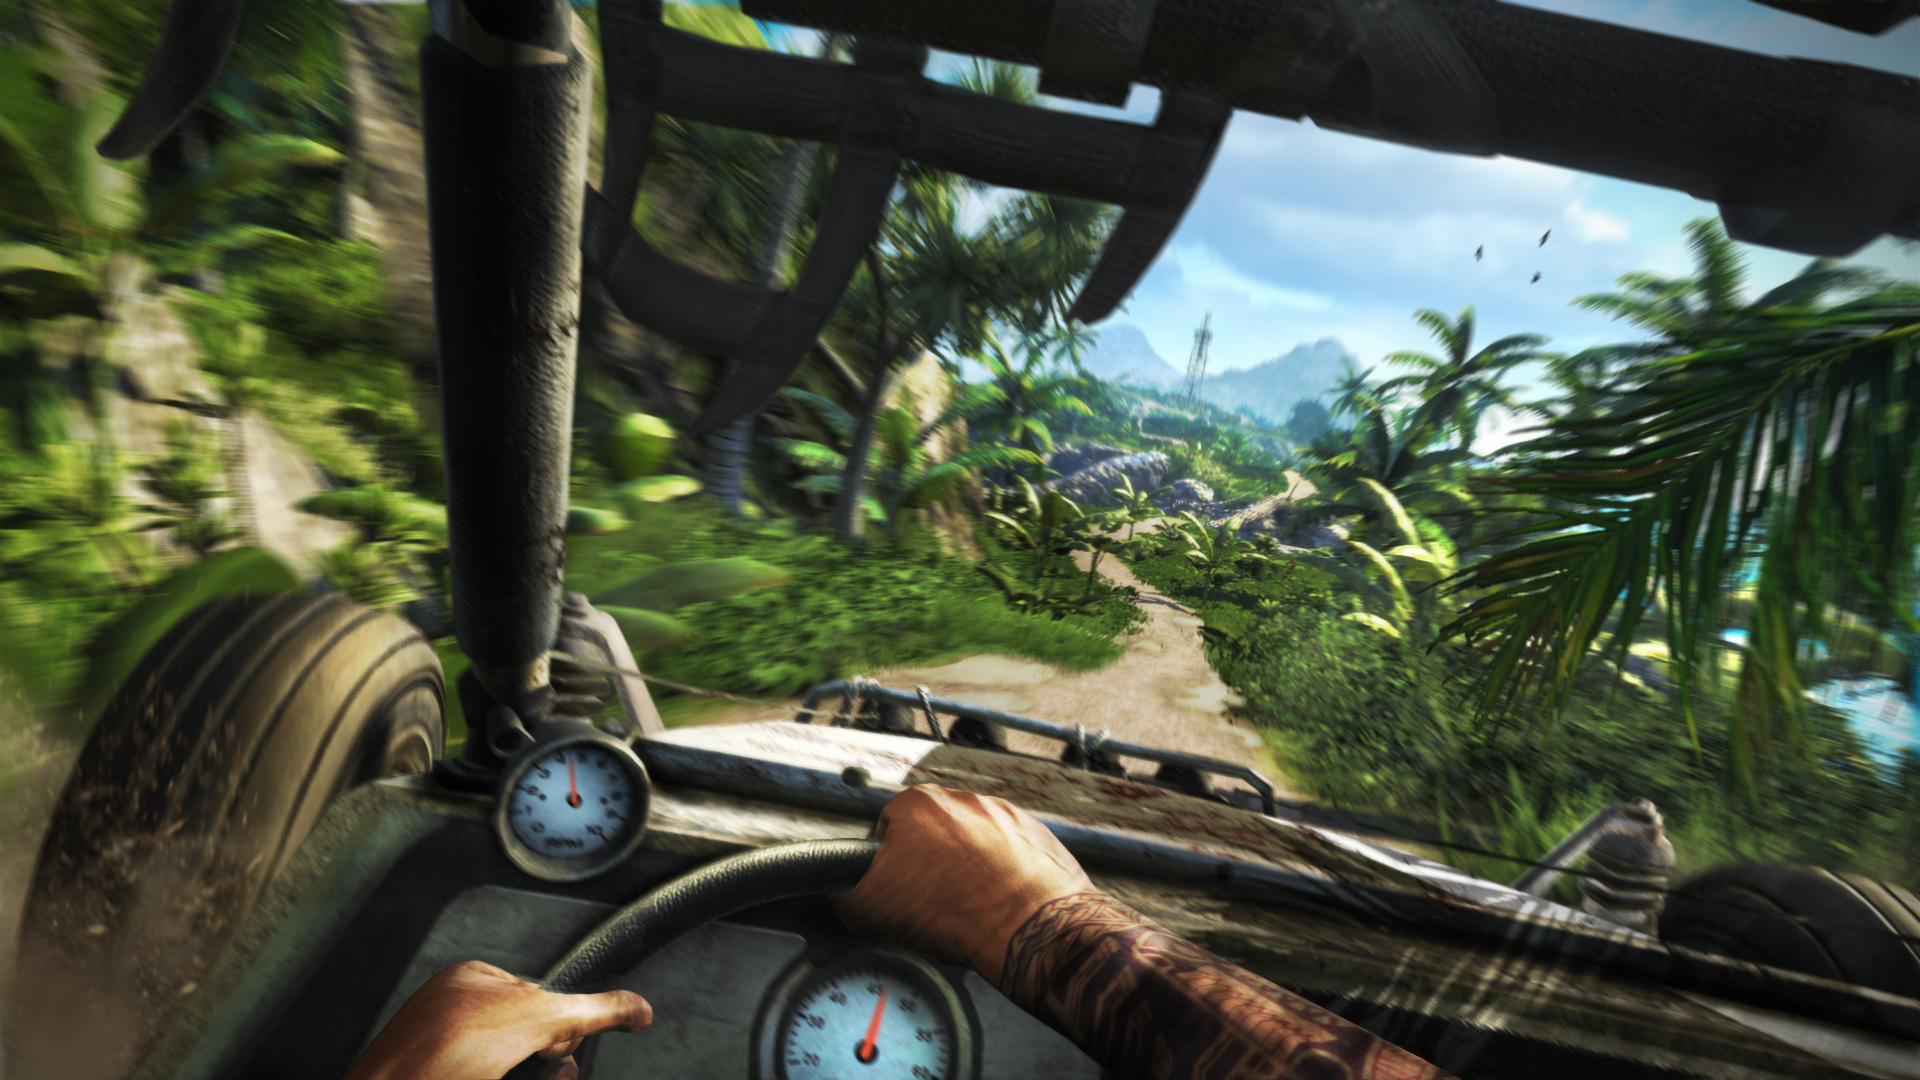 Far Cry 3 Deluxe Edition Free Download (v1.05) » STEAMUNLOCKED